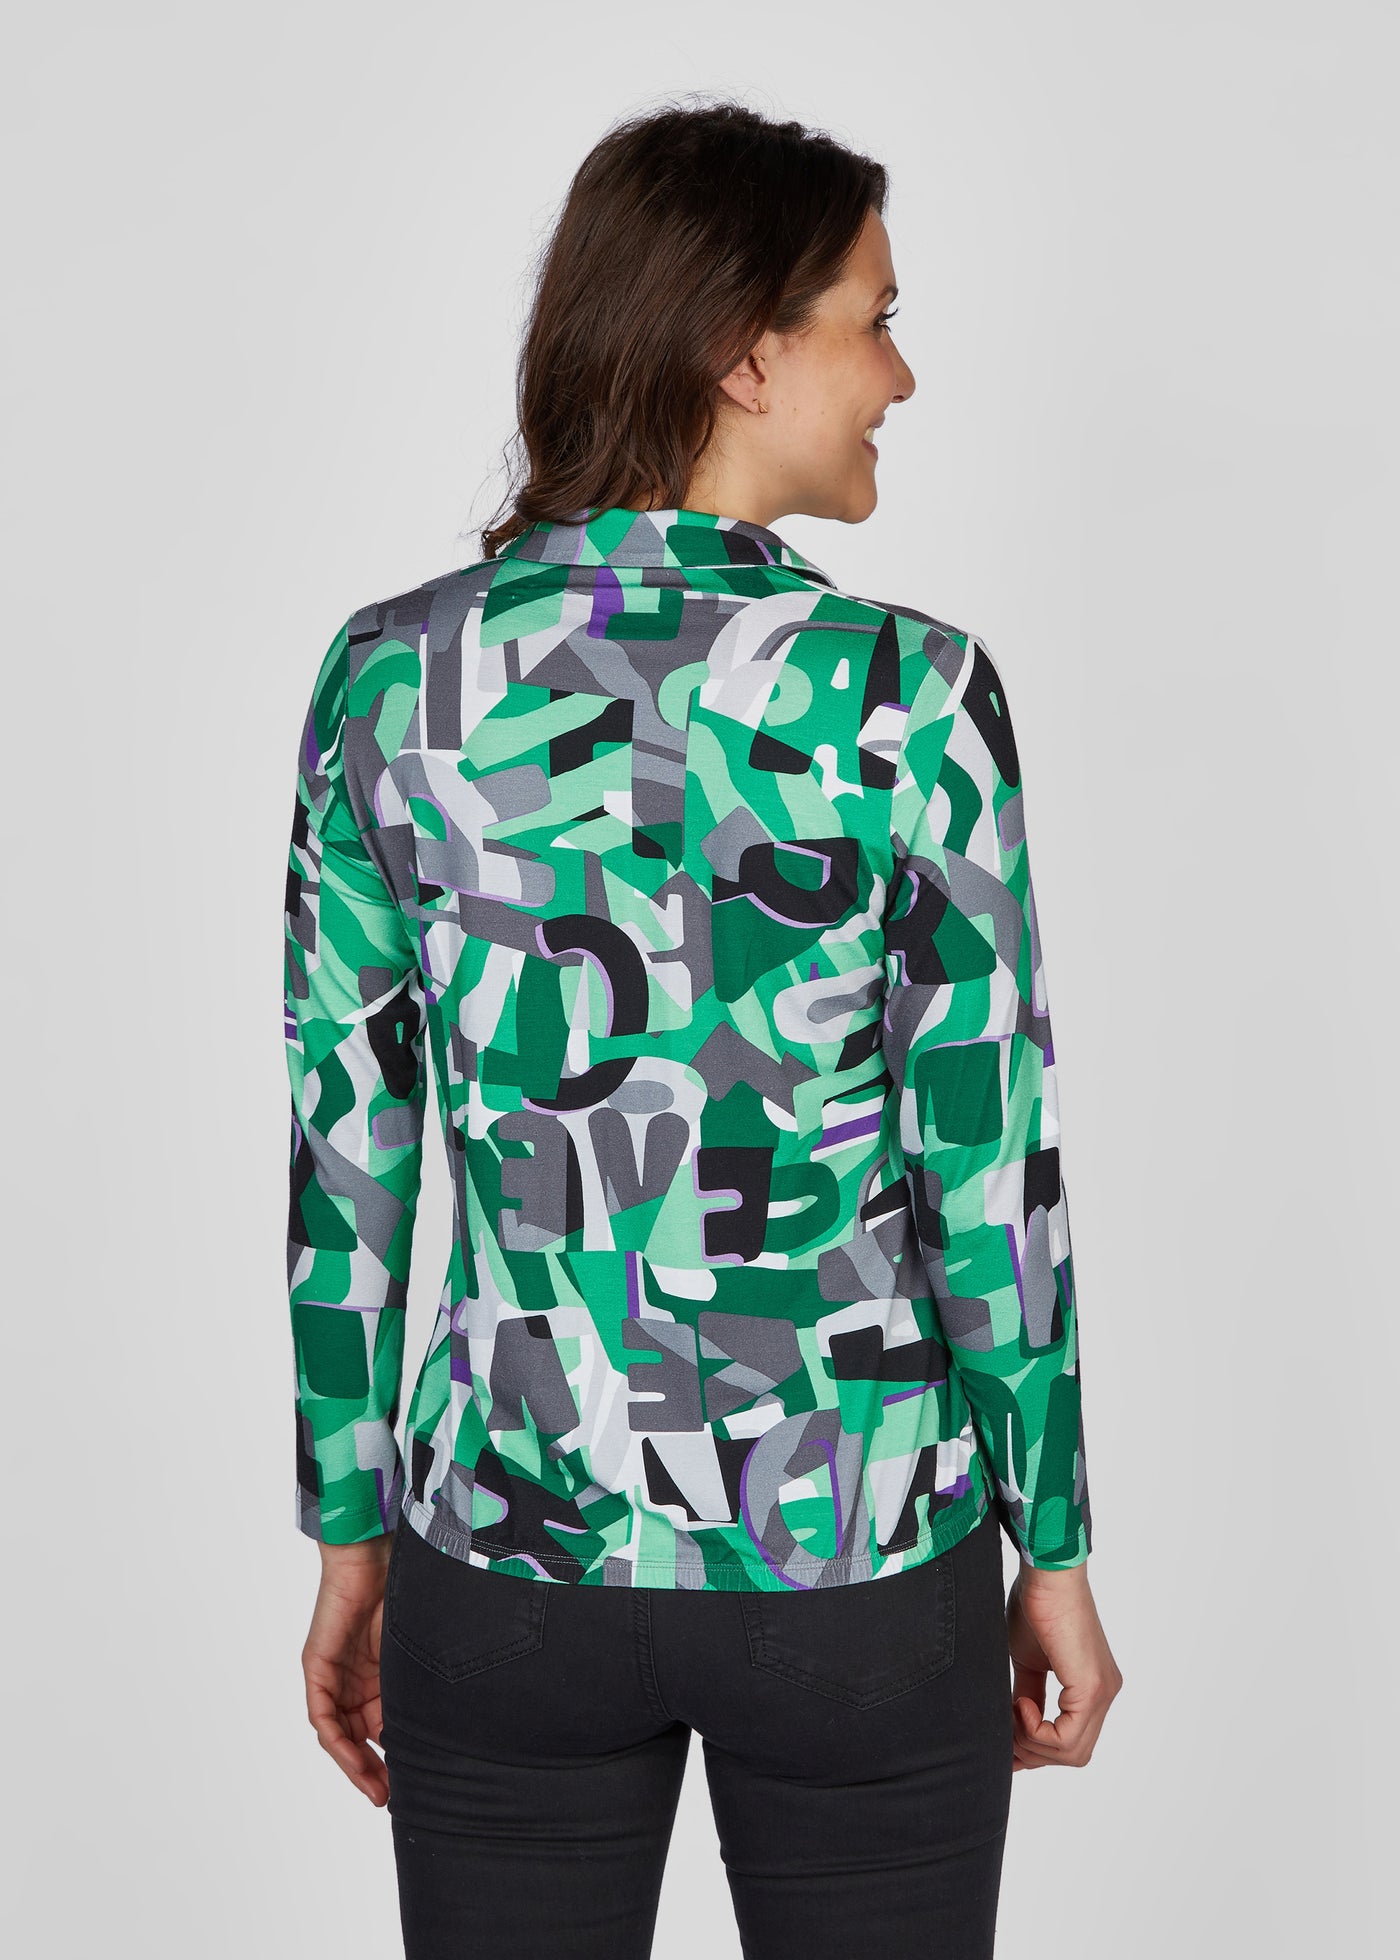 Green, Purple & Grey Abstract Print Long Sleeve Top with Buttons & Collar